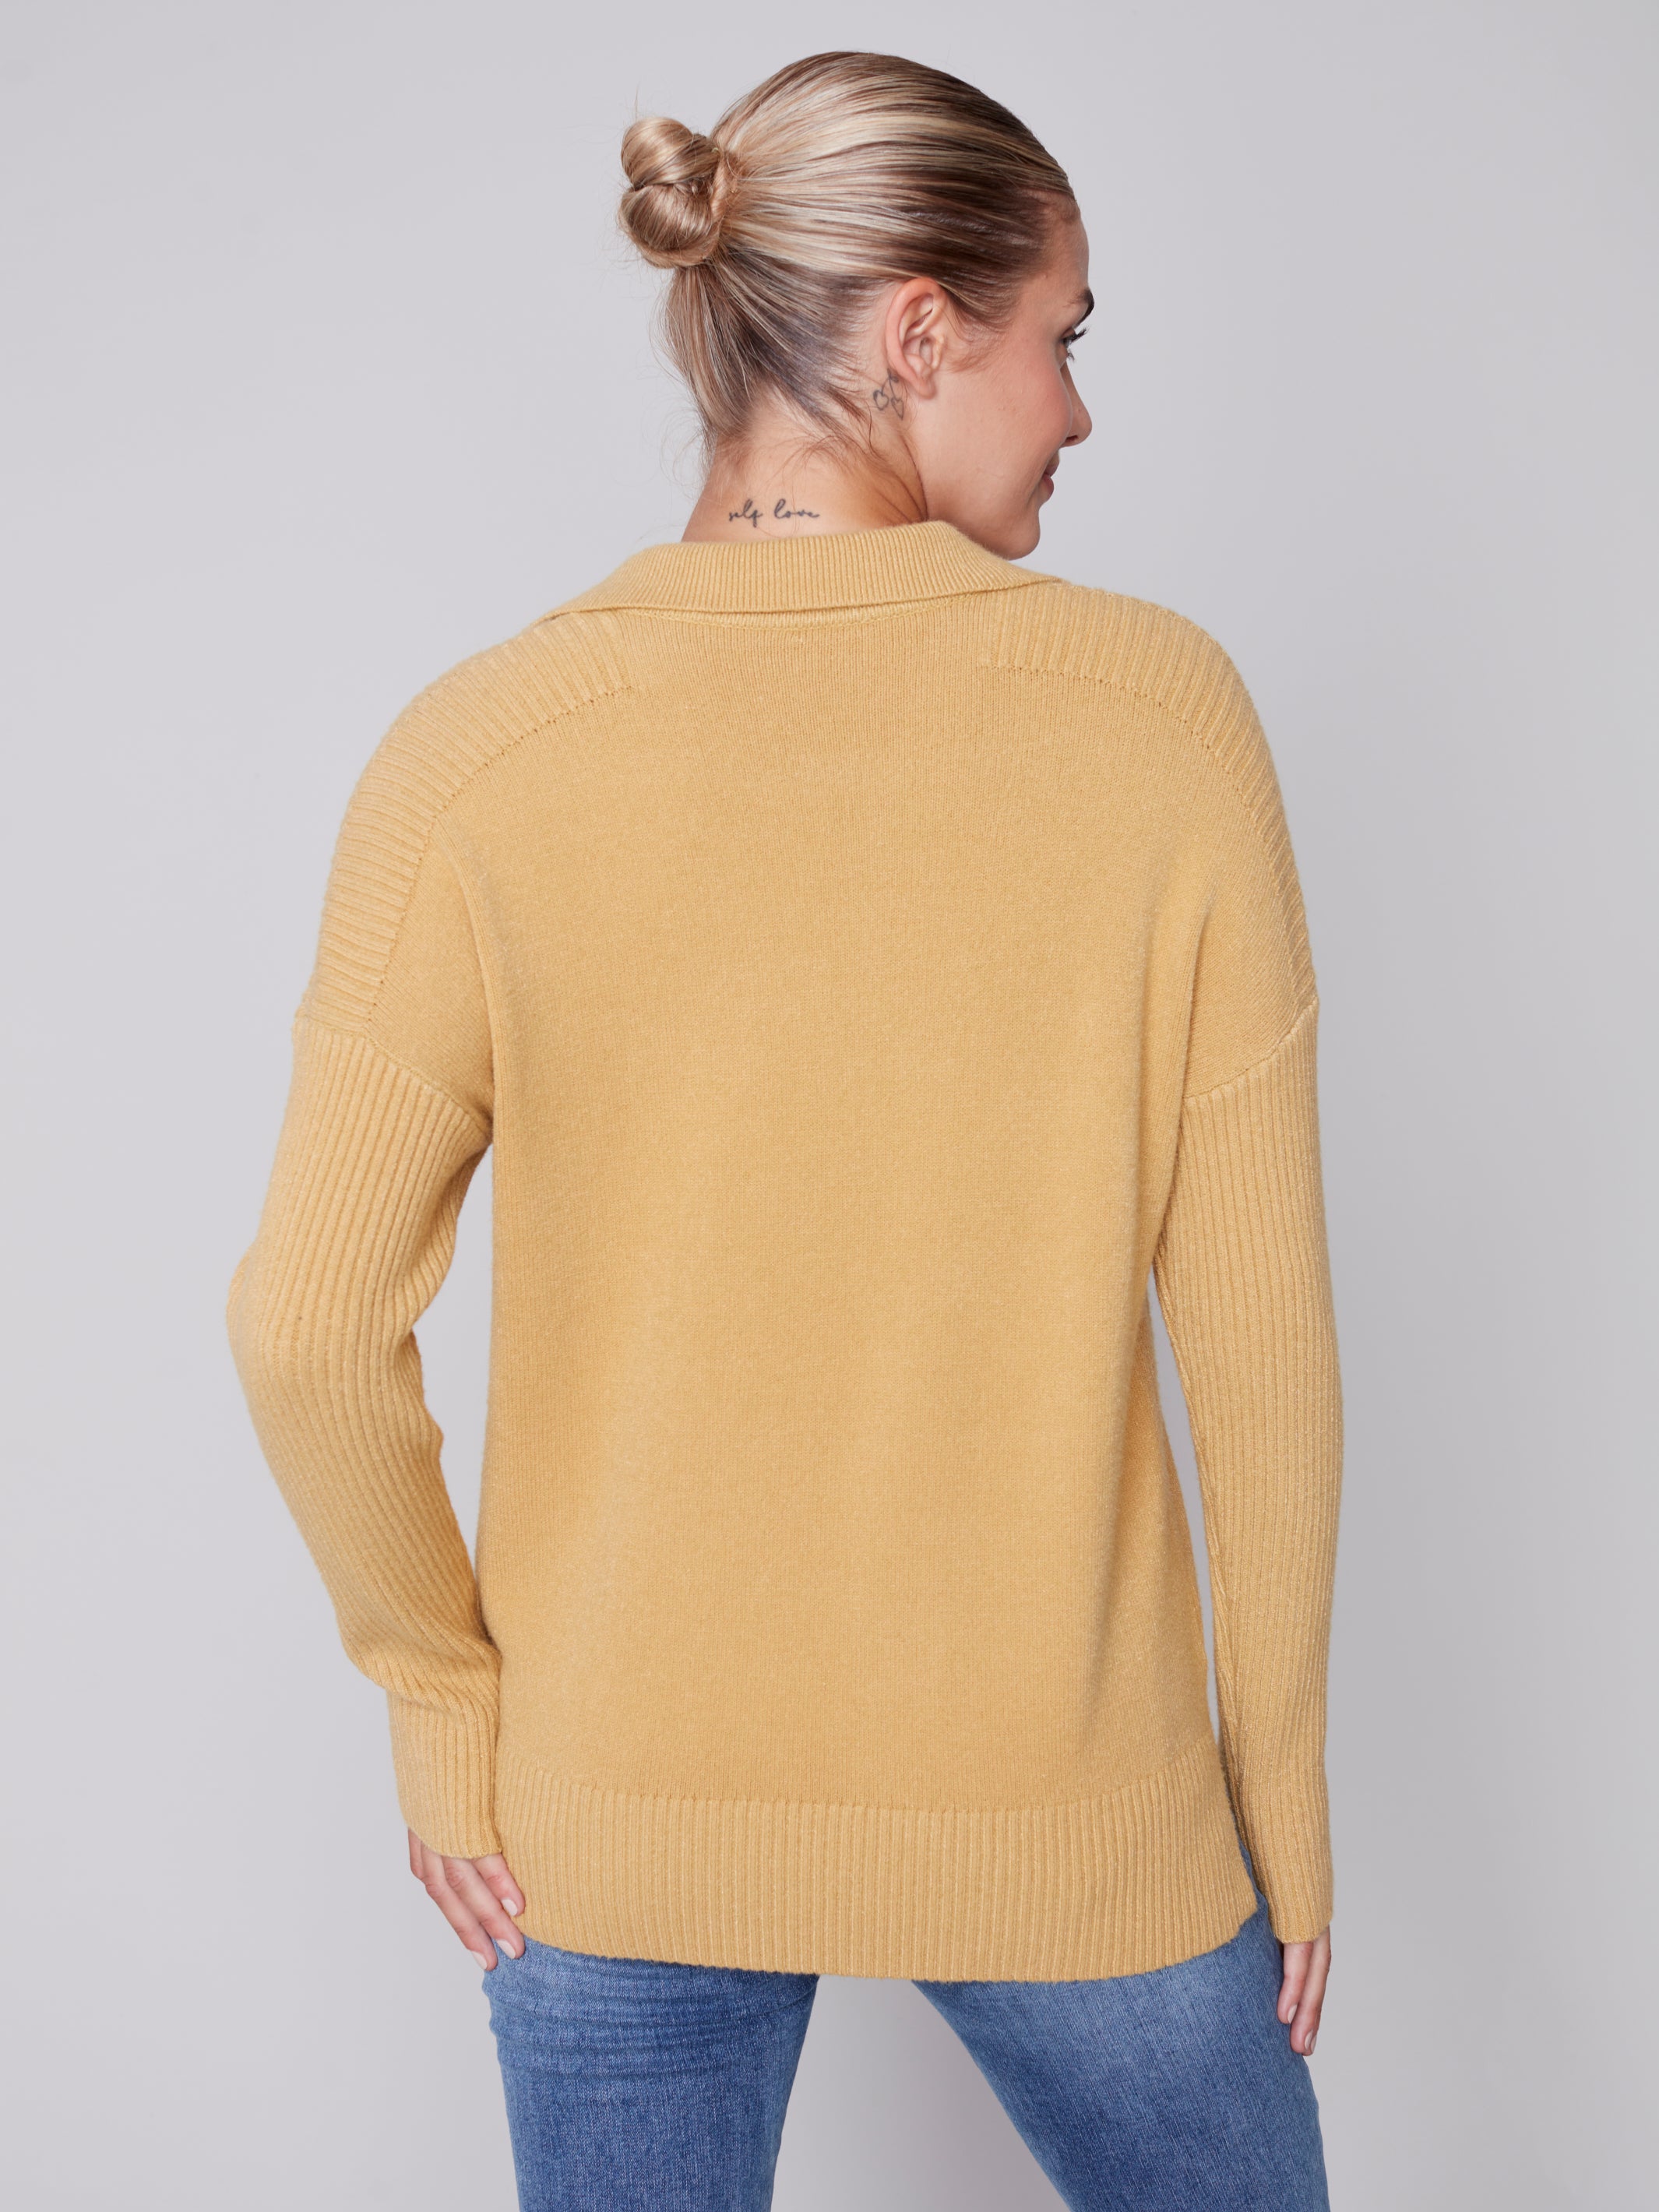 Charlie B Jhonny Collar Sweater with Front Pockets